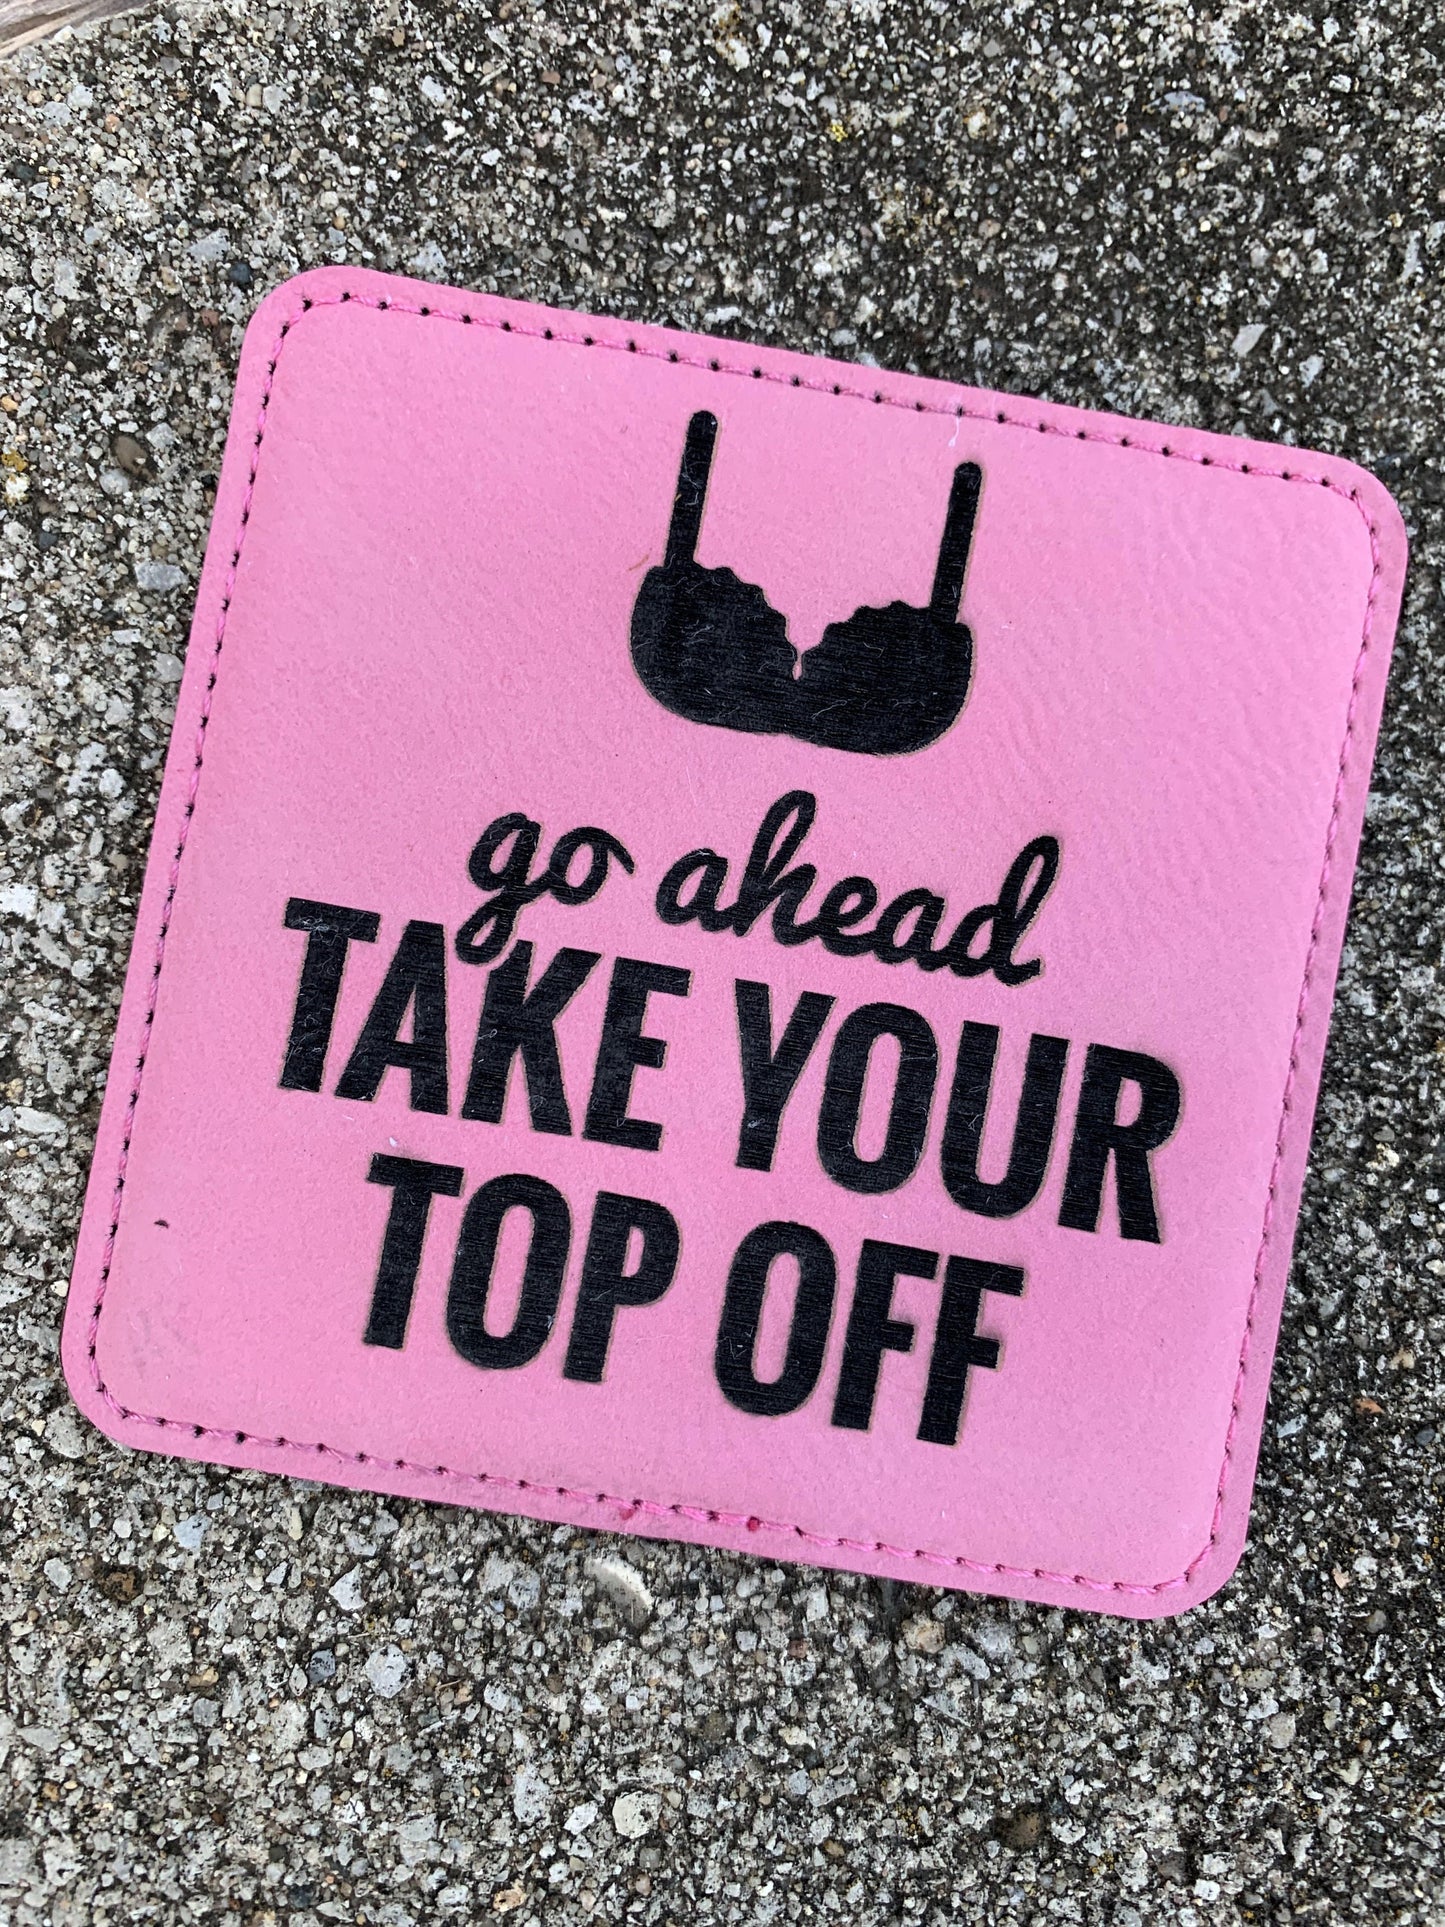 Take Your Top Off Coasters - Set of 4 Coasters